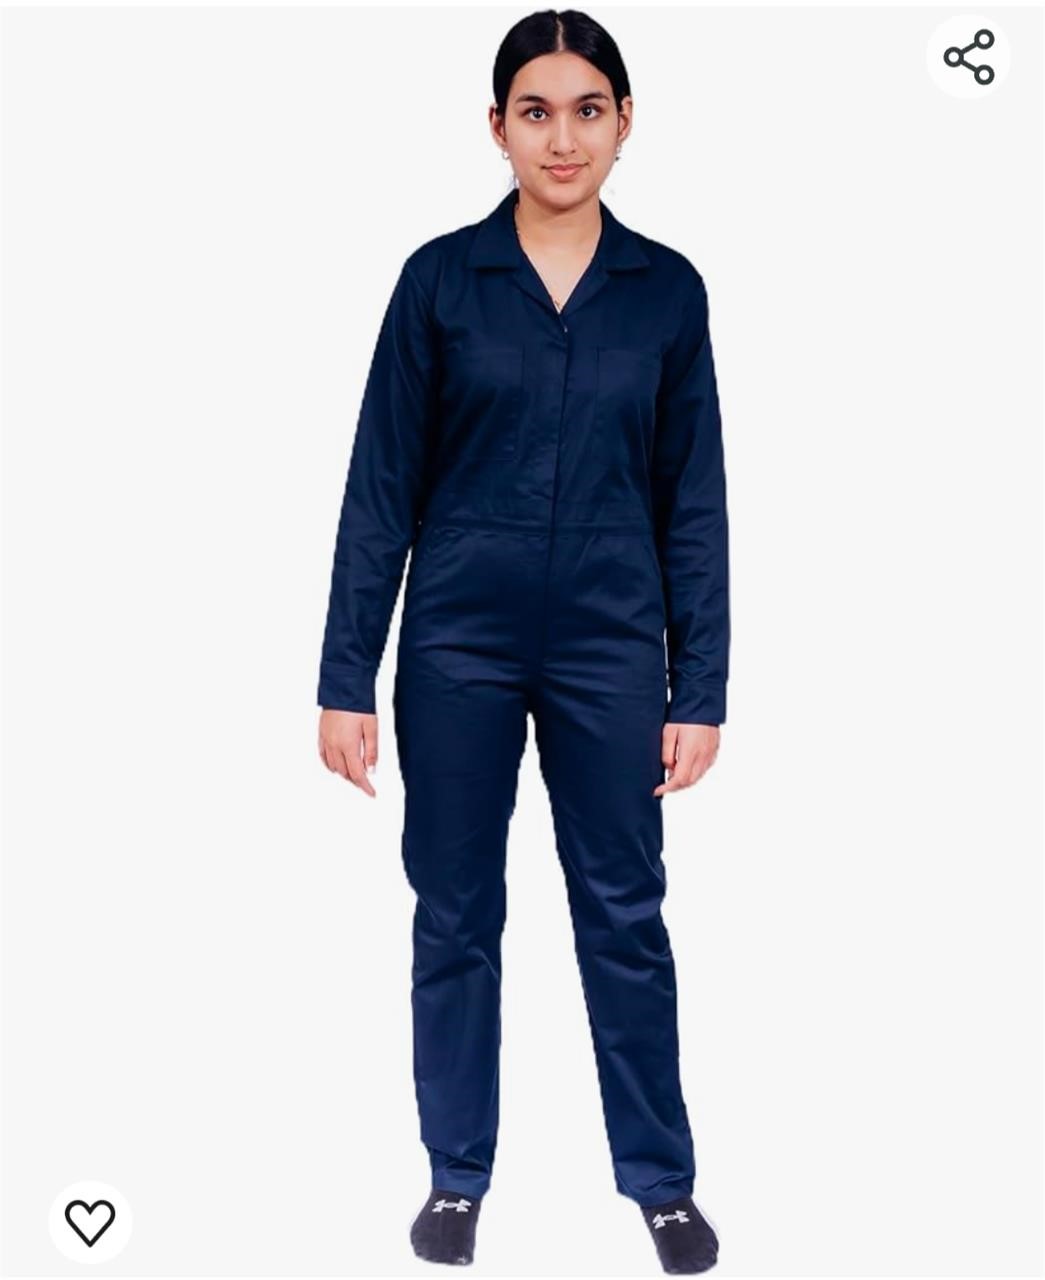 ($59) Women's Coverall Jumpsuit Navy, Size: L